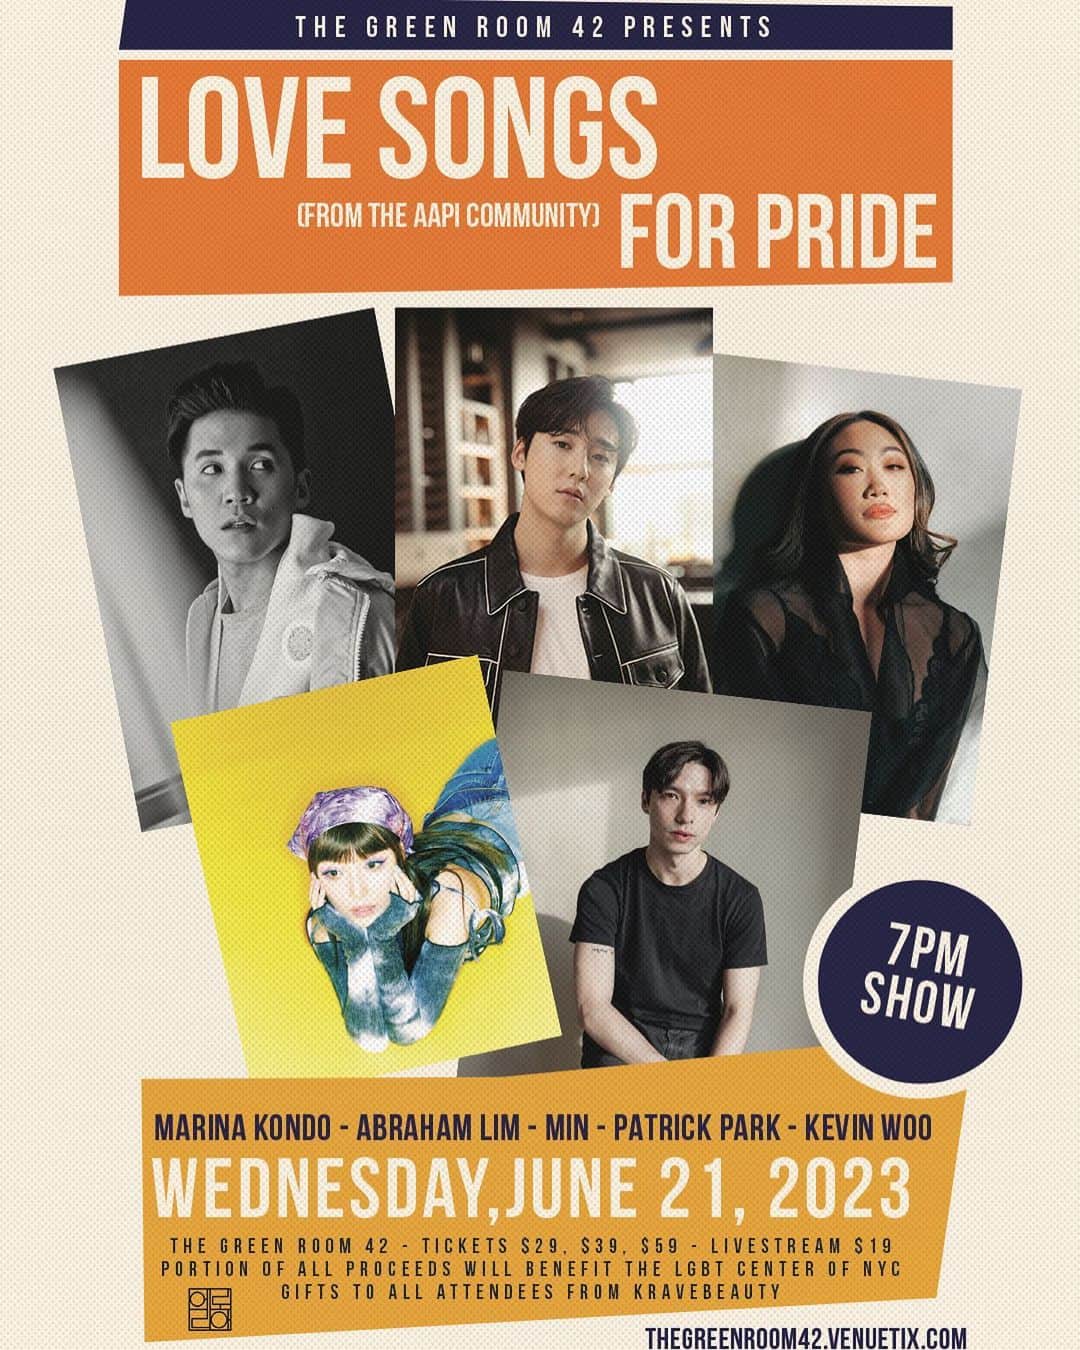 ケビン さんのインスタグラム写真 - (ケビン Instagram)「HAPPY PRIDE MONTH🏳️‍🌈🏳️‍⚧️ Truly happy to announce that I’ll be performing on stage alongside a few of my @kpopbroadway cast-mates for LOVE SONGS FOR PRIDE💜 at @thegreenroom42 in NYC on June 21st. Make sure to mark you calendars!  We’re so happy to literally use our voices to uplift and celebrate the LGBTQ+ community. Come join us for a night of joyous celebration filled with love tunes and dancing!💃🕺  Tickets available NOW (link in BIO) Livestream tix are also available for those who can’t make it in person!🙌🏻  Portion of all proceeds will benefit the LGBT Center of NYC @lgbtcenternyc   Special shout out to @therealabraham for producing this show🫶🏻, @kravebeauty for providing gifts for all attendees, and @elorea for being our wonderful sponsor!  CAN’T WAIT TO SEE YOU ALL THERE!🙌🏻  クローバーのみなさん！6月21日にLOVE SONGS FOR PRIDEという公演に参加します！KPOPのキャストと久しぶりに立つステージですごく嬉しいです！今月はPRIDE MONTHでLGBTQ+コミュニティをサポートするステージです🌈 生配信しますので日本からもたくさんの応援よろしくお願いします！チケットはプロフィールで💜  클로버 여러분! 6월 21일에 LOVE SONGS FOR PRIDE라는 공연에 참가합니다!  KPOP뮤지컬의 캐스트와 오랜만에 서는 스테이지라서 너무 기쁩니다! 이번 달은 전셰게의 PRIDE MONTH이라서 LGBTQ+ 커뮤니티를 서포트하는 공연입니다🌈  실제로 못 오신 분들을 위해 생중계 준비 되어있으니 한국에서도 많은 응원 부탁드립니다! 티켓 링크는 프로필에💜」6月2日 7時15分 - kevinwoo_official